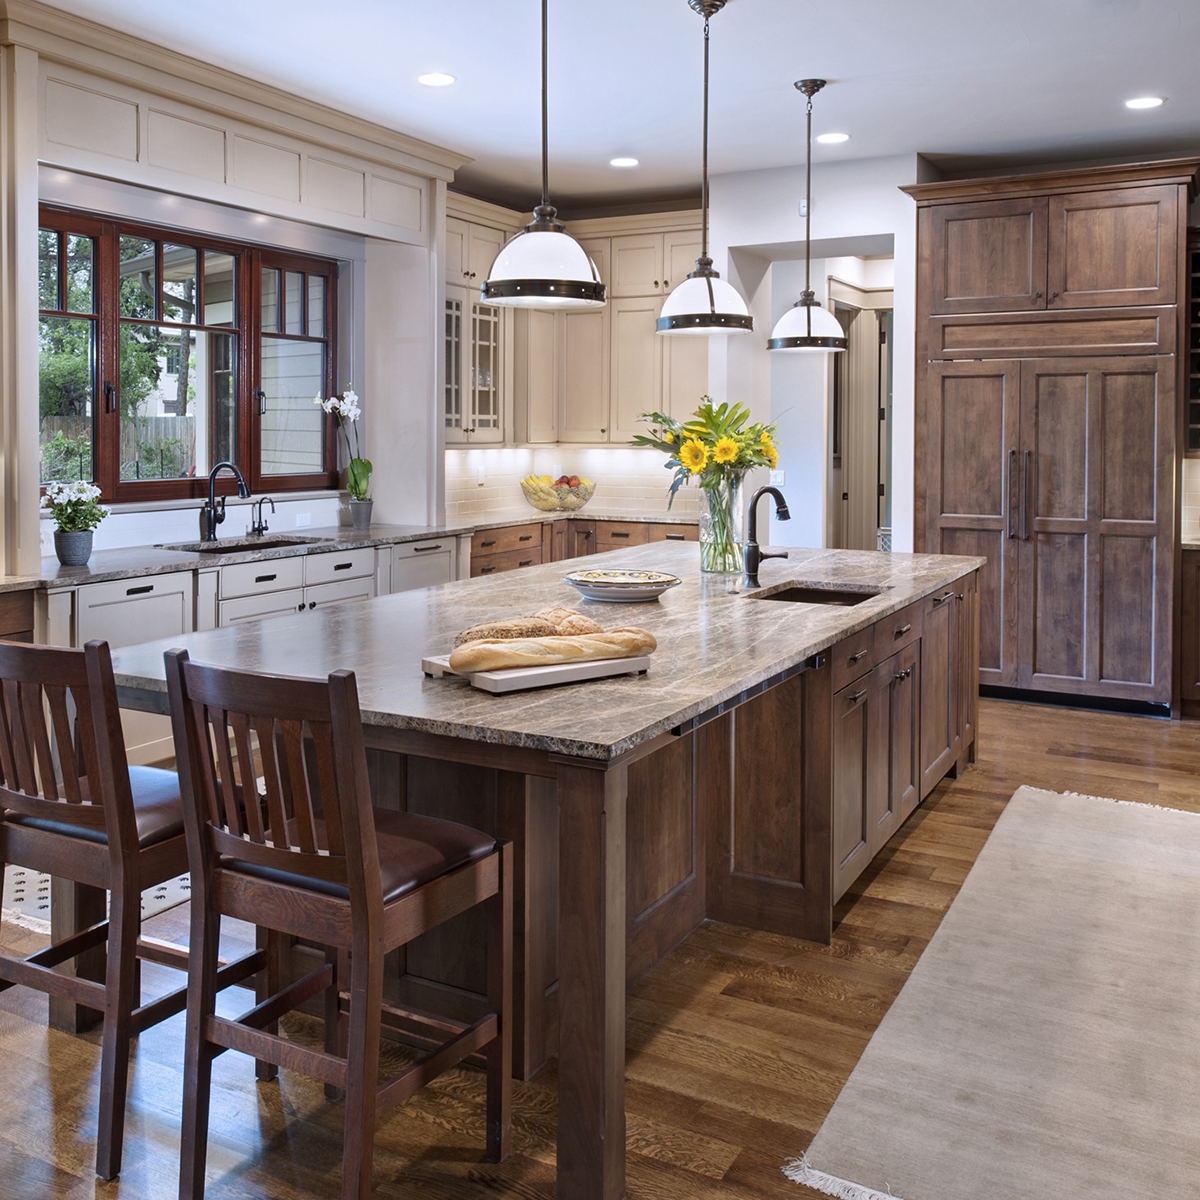 R.D. Henry Cabinets & Company from Advanced Interiors | West Michigan